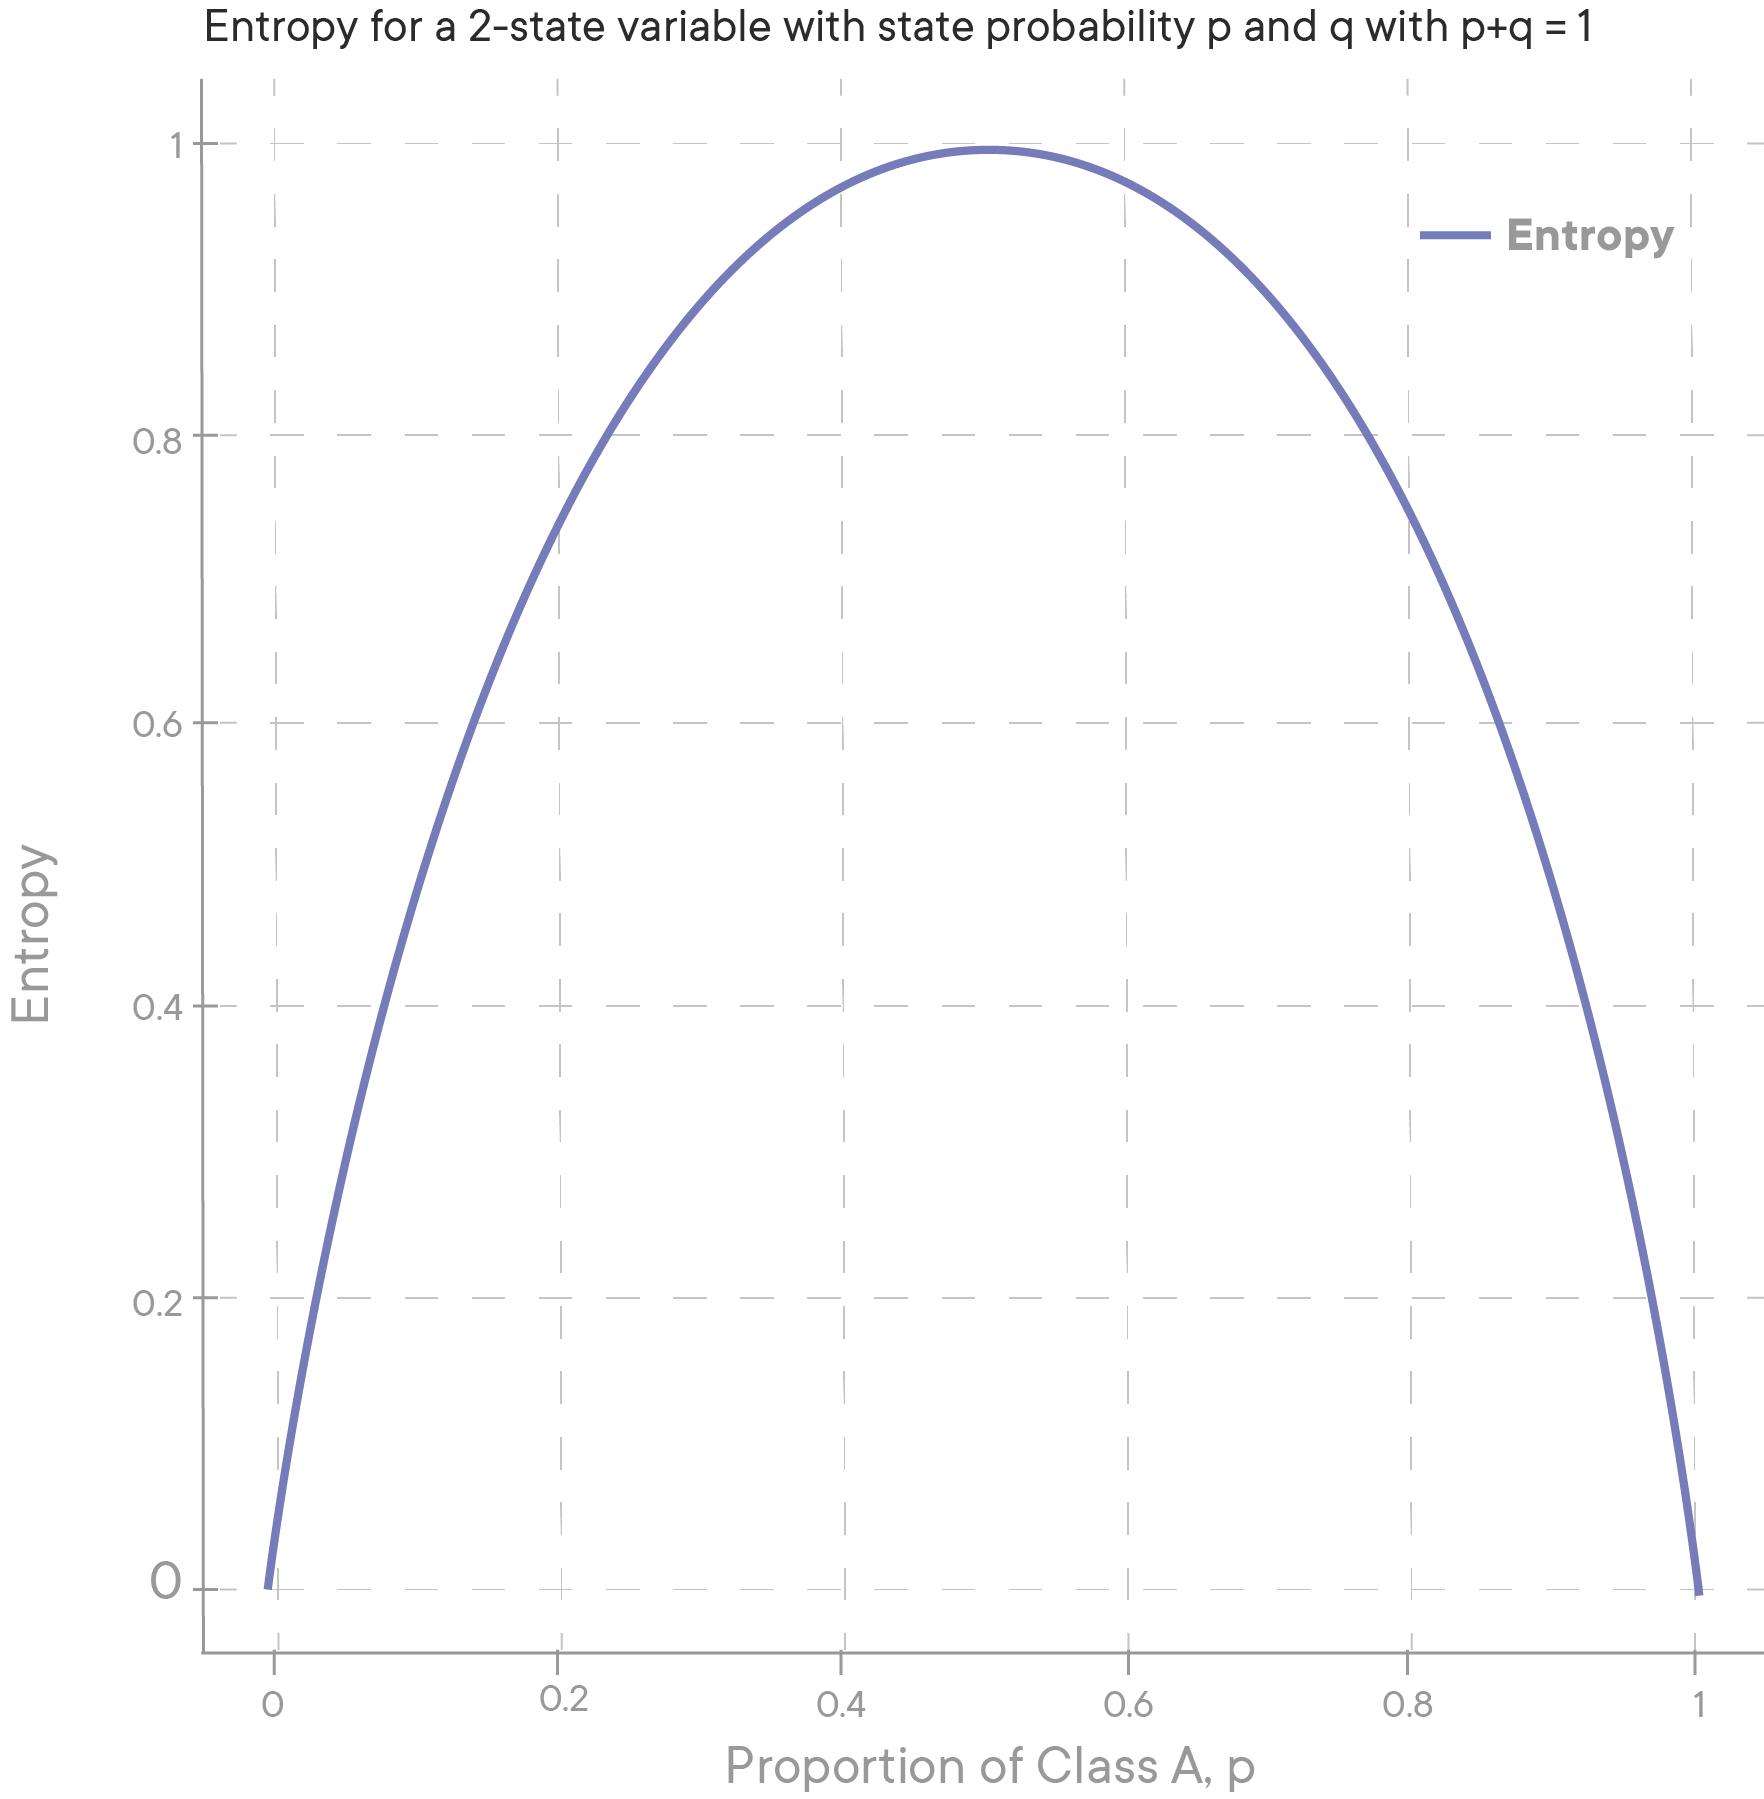 parabola that shows the proportion of class p on the x-axis and entropy on the y-axis. the parabola peaks at 0.5